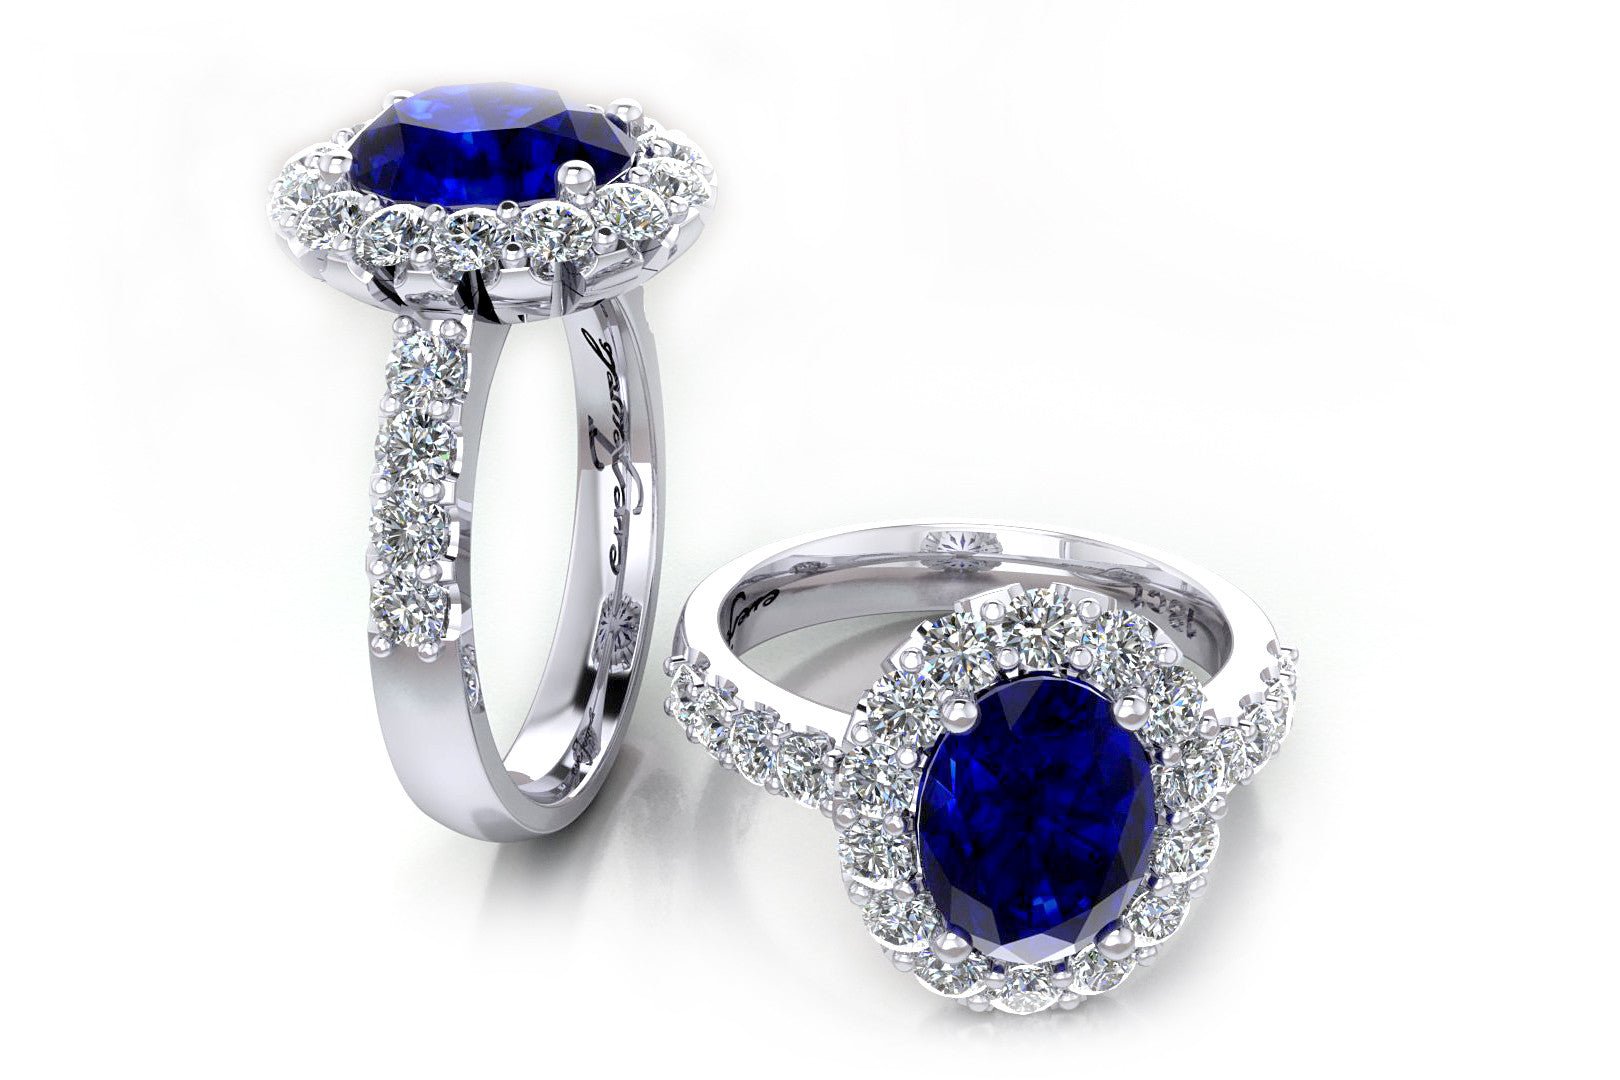 18ct White gold oval tanzanite dress ring with a halo of diamonds - ForeverJewels Design Studio 8